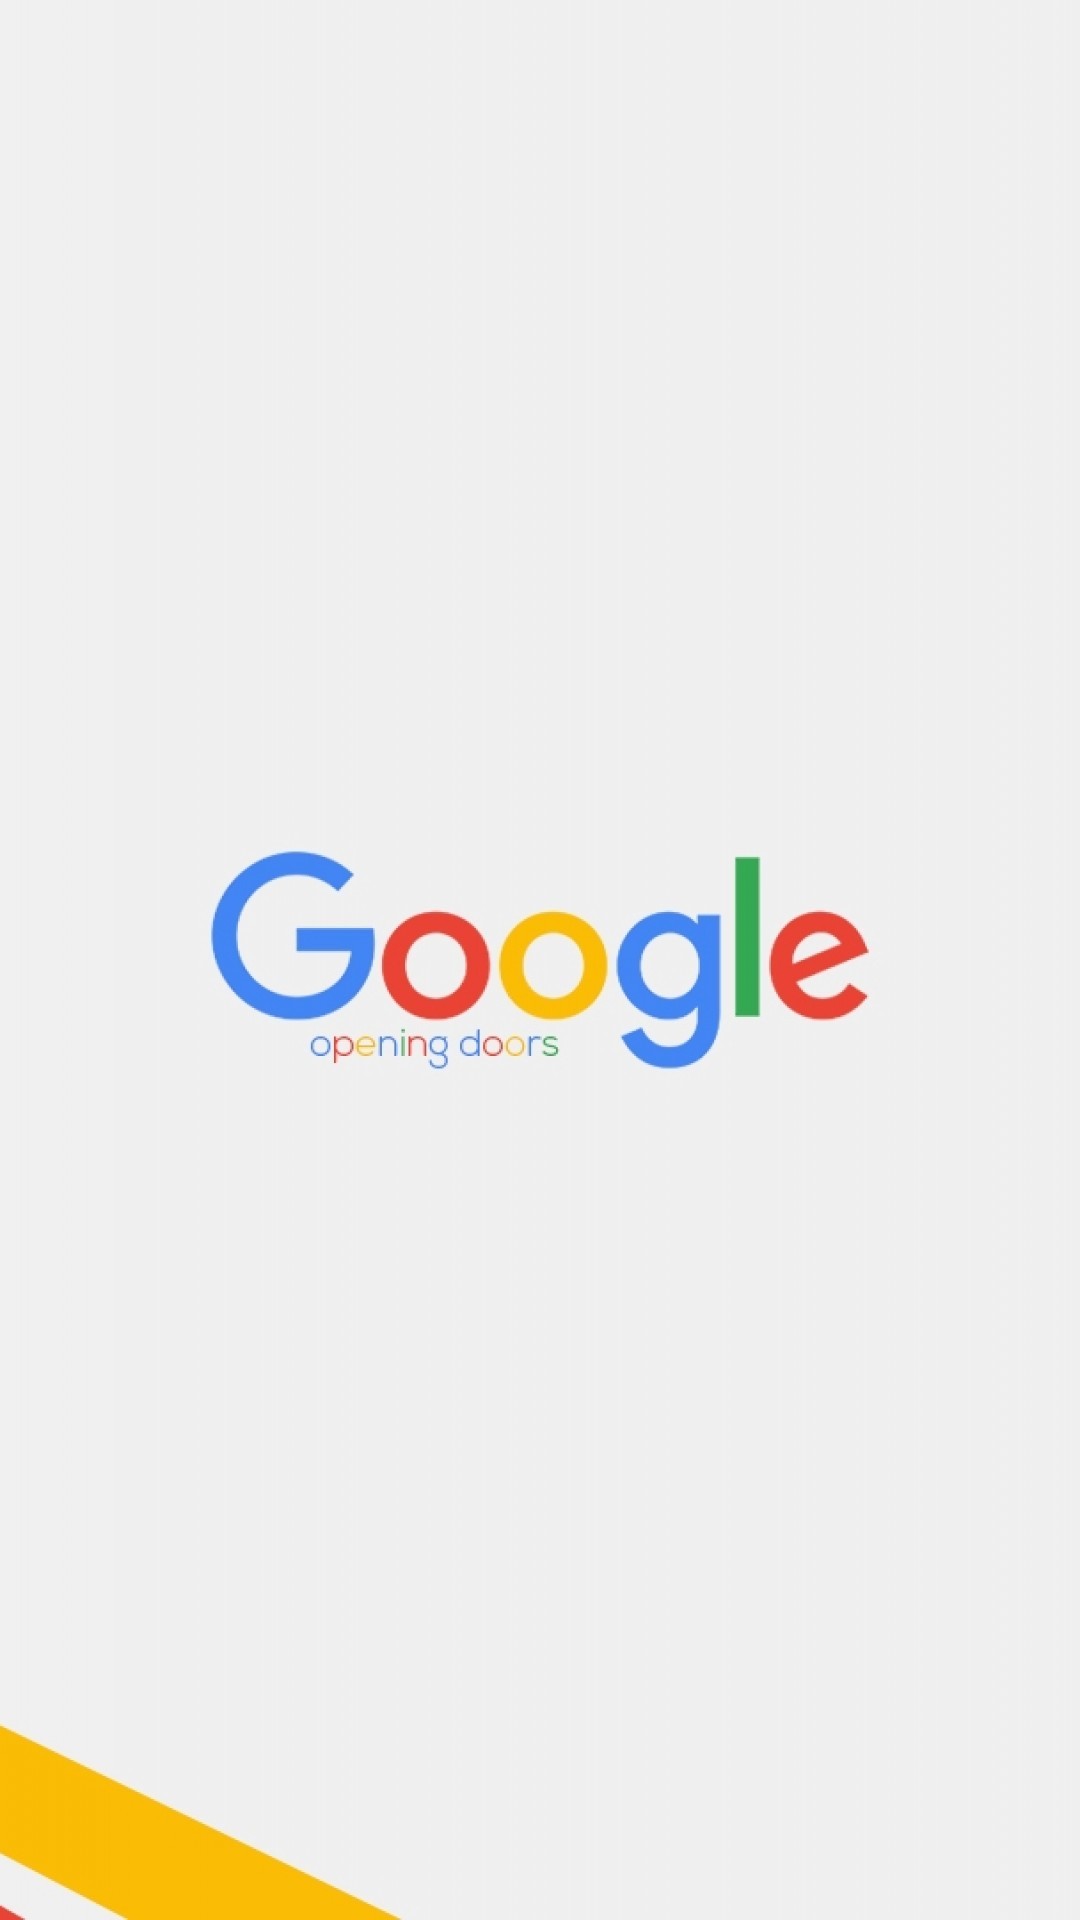 Google Wallpaper Hd - Google Wallpaper Hd 1080p , HD Wallpaper & Backgrounds